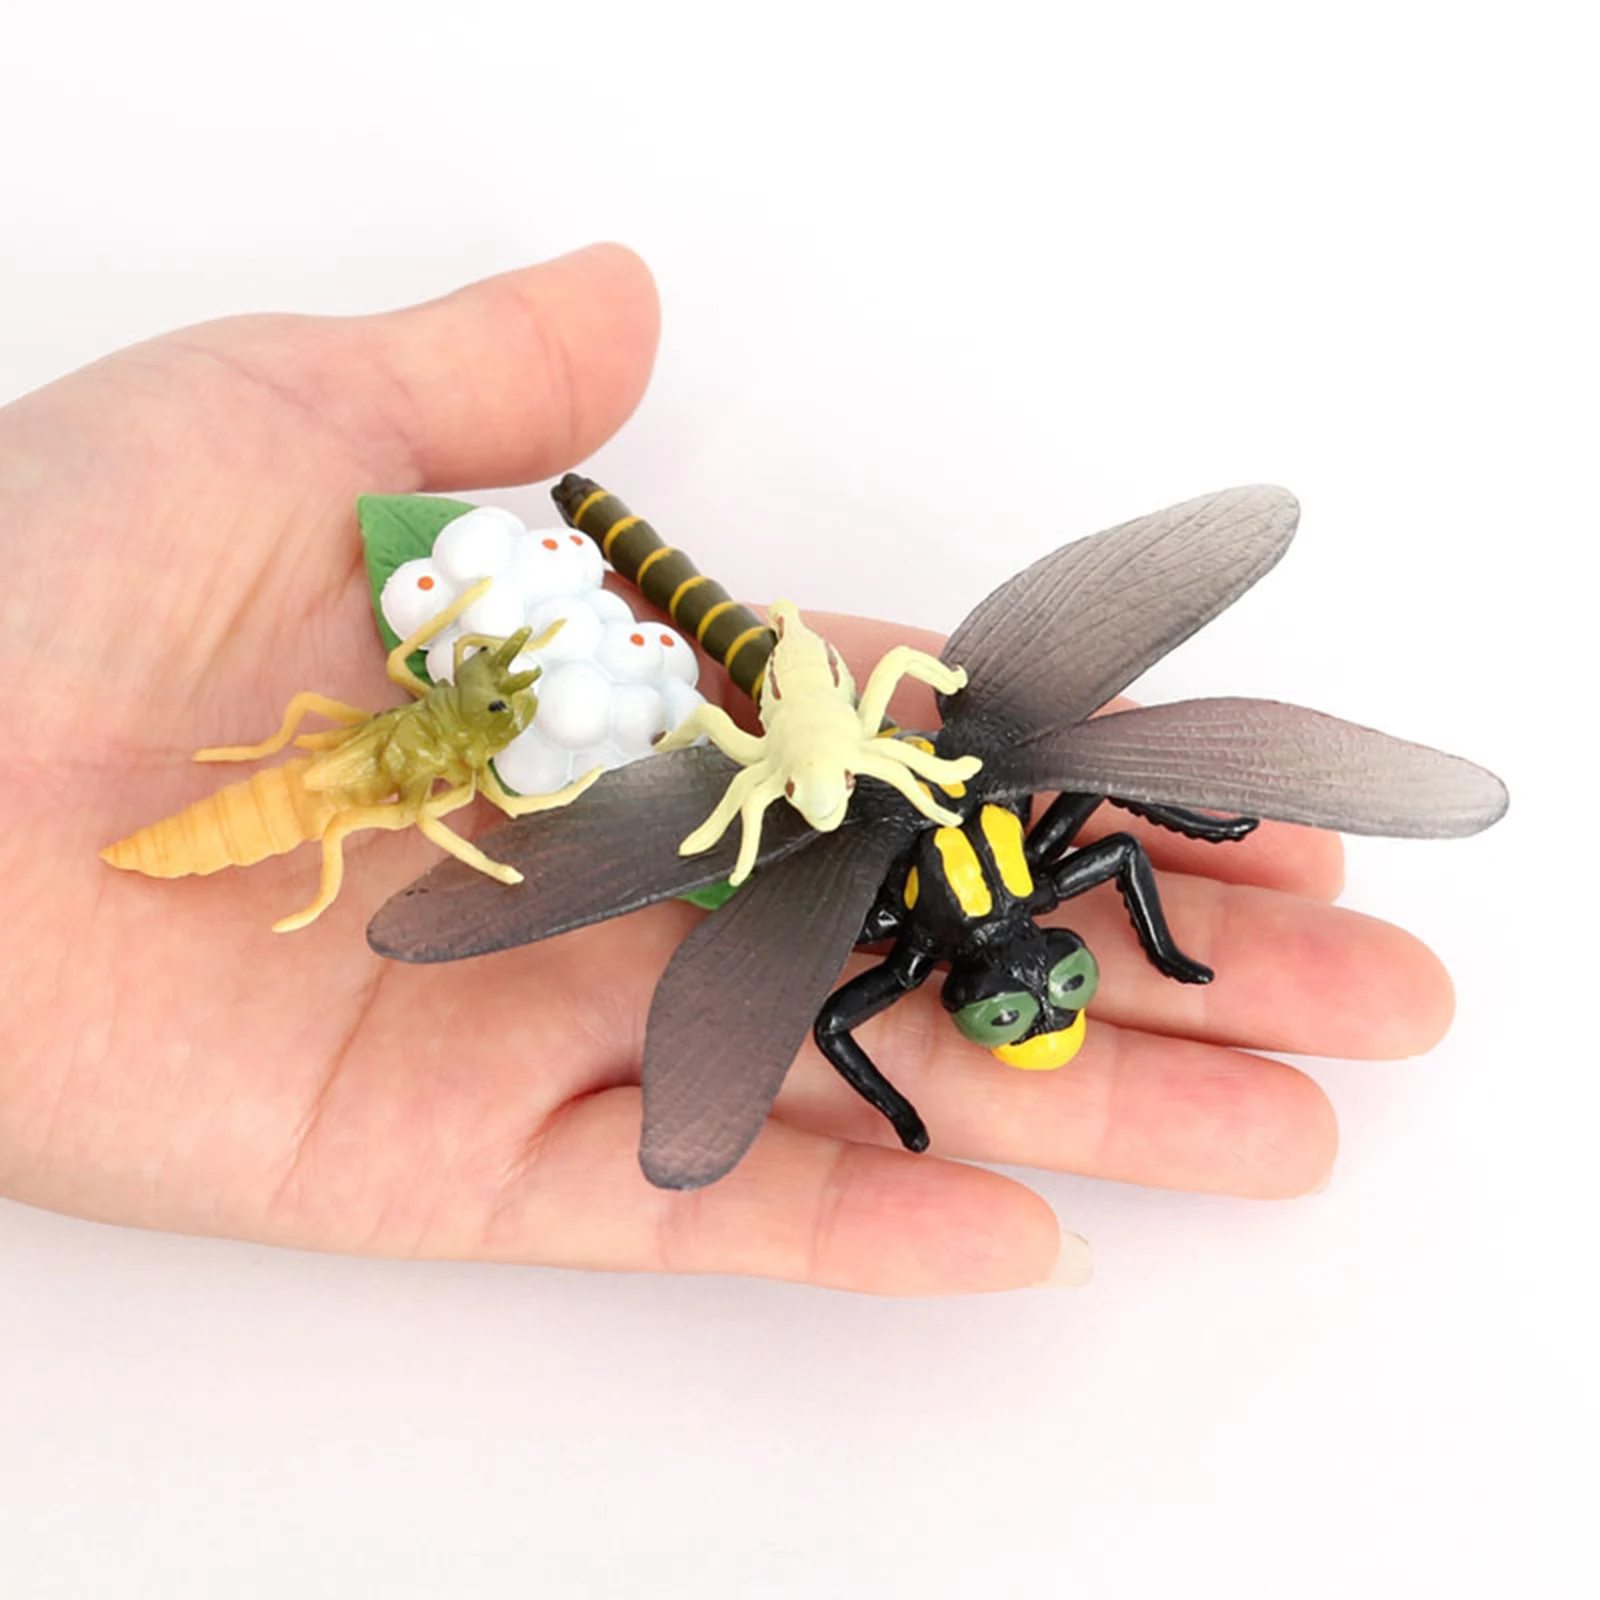 Dragonfly Life Cycle Solid Plastic Toy Animal Bug Growth Cycle Teaching Aid 